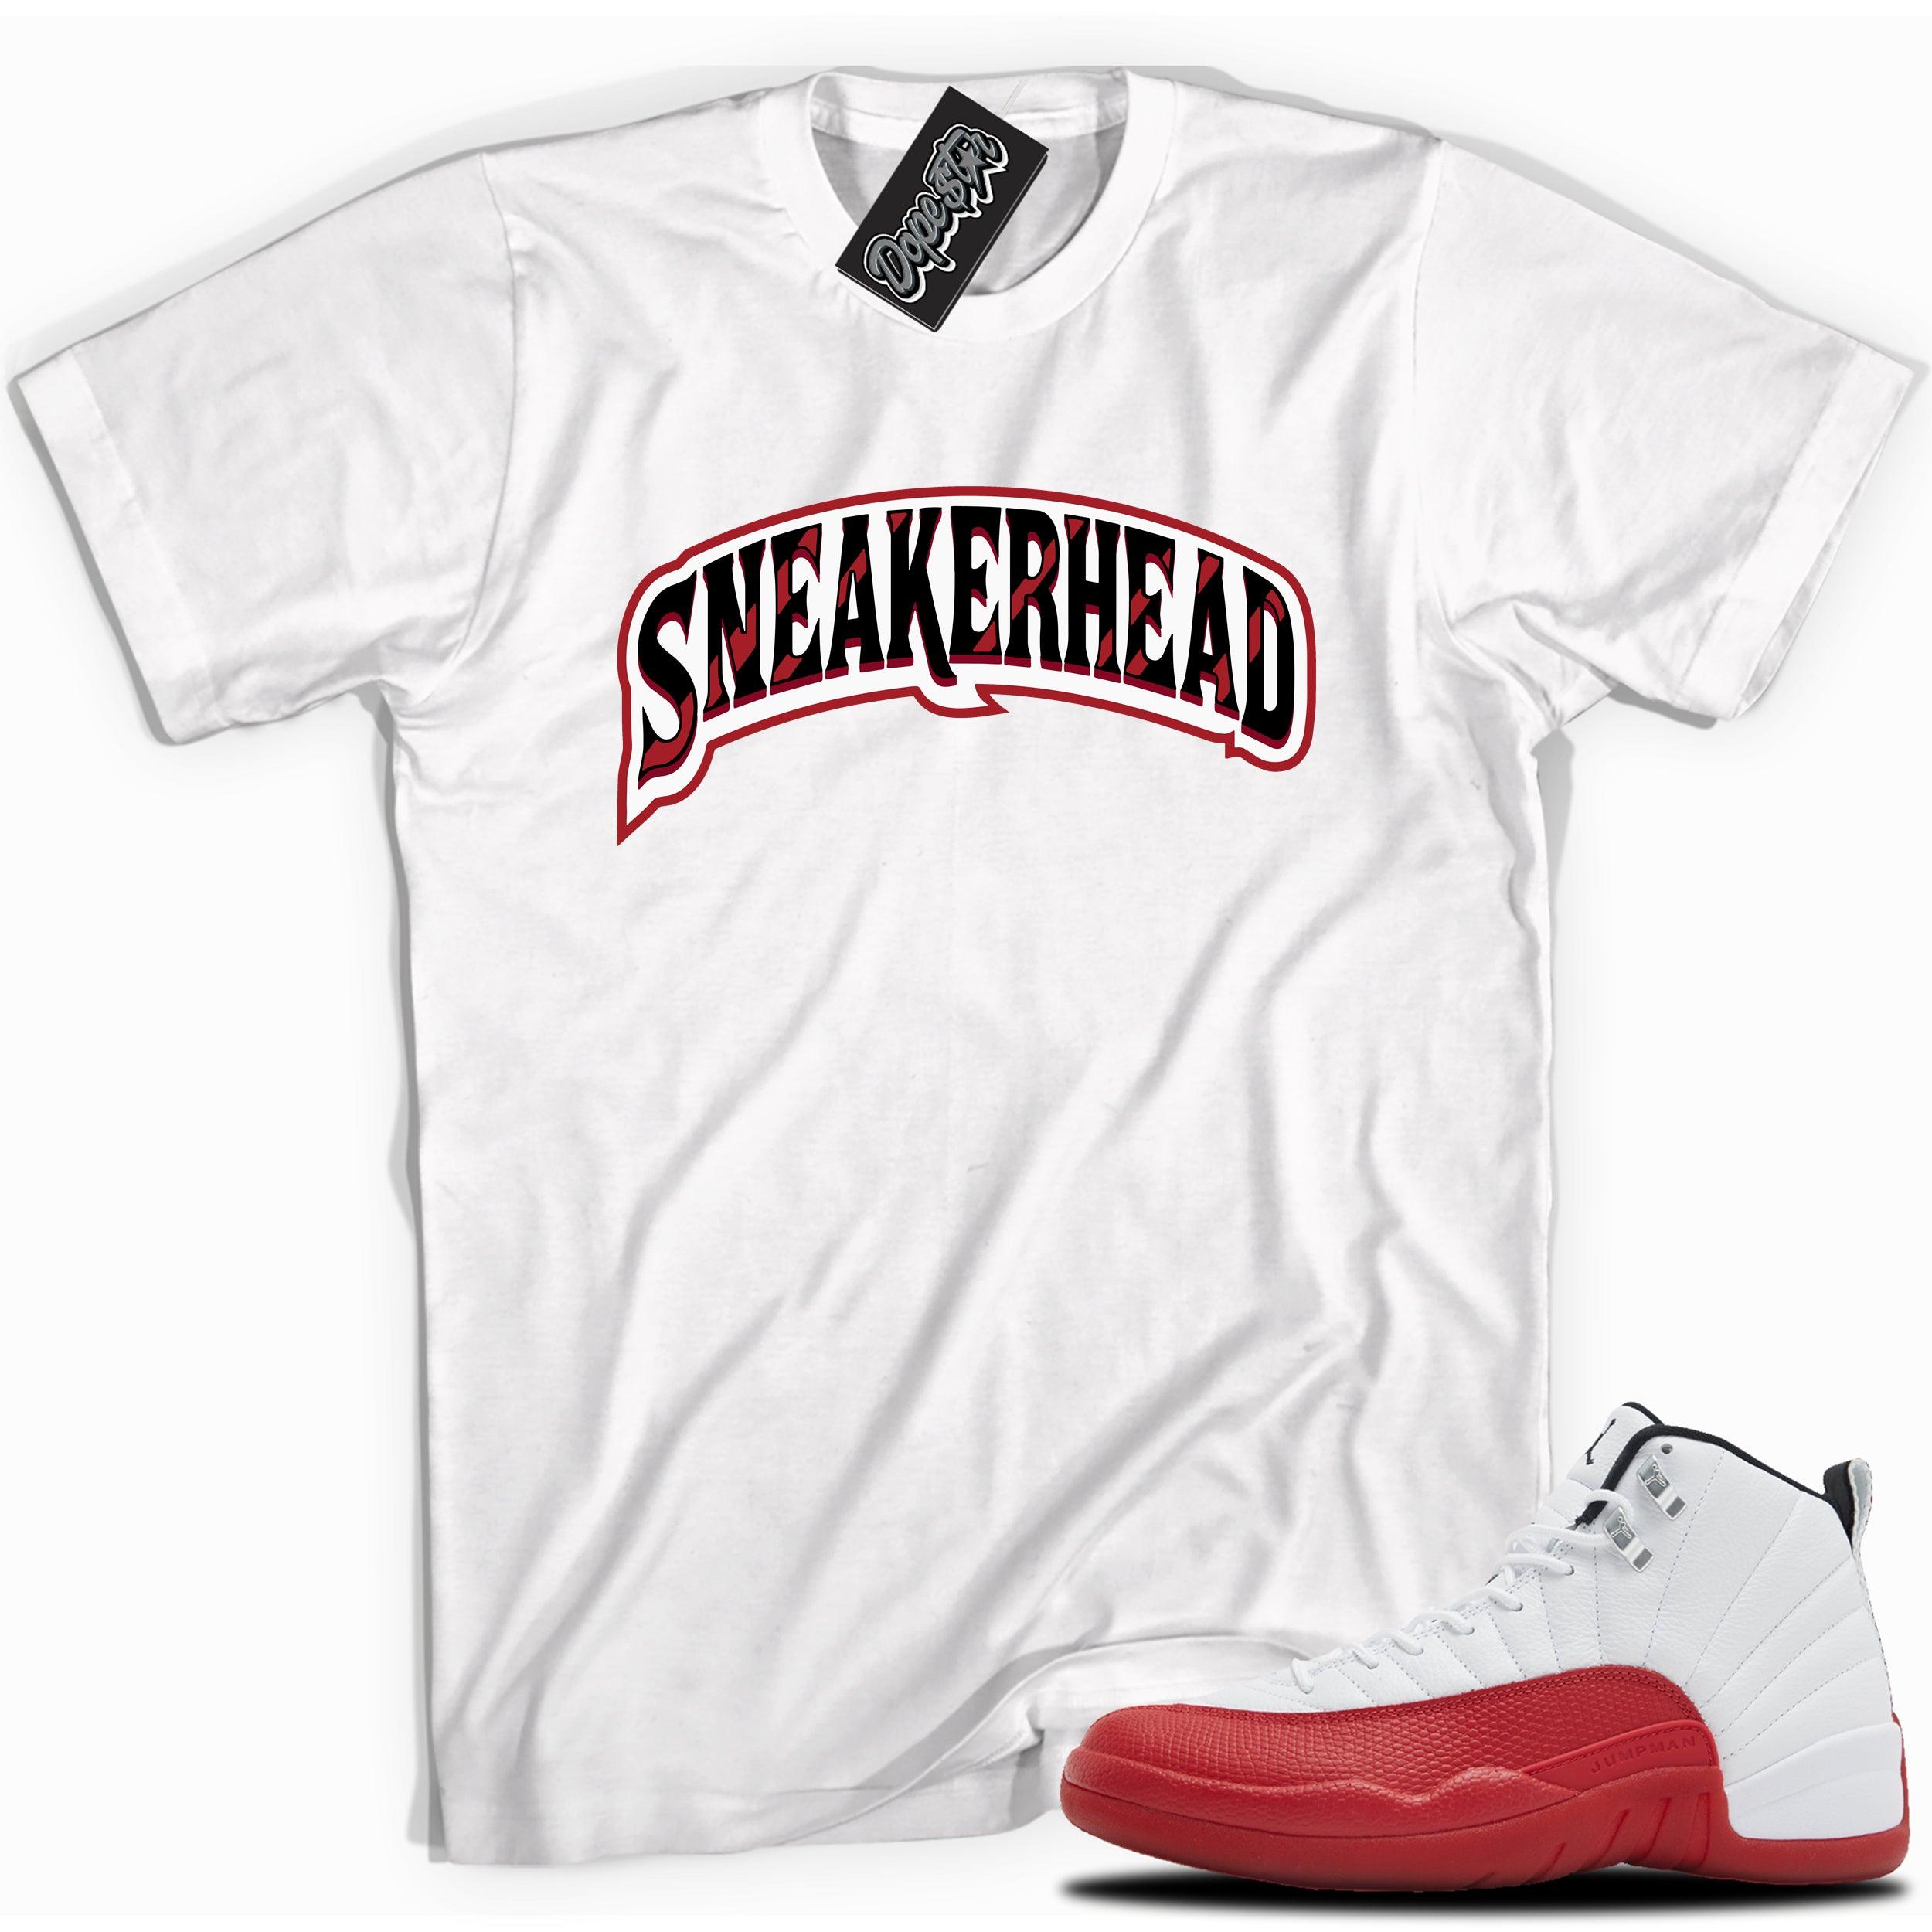 Cool White graphic tee with “Sneaker-Head” print, that perfectly matches Air Jordan 12 Retro Cherry Red 2023 red and white sneakers